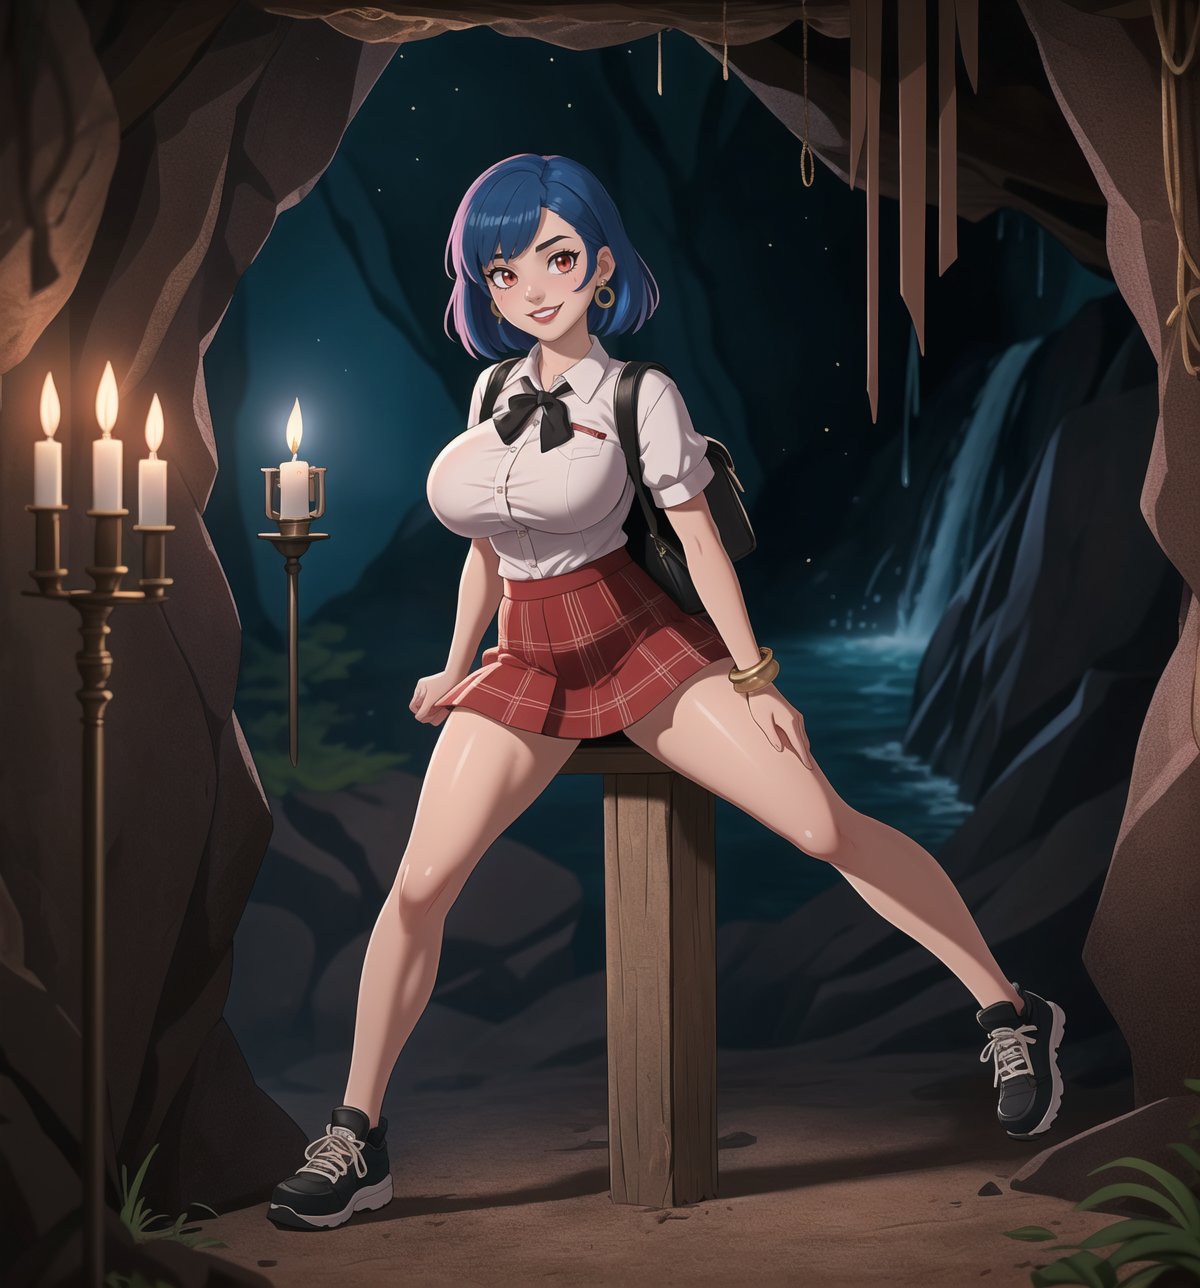 An ultra-detailed 4K fantasy-adventure masterpiece, rendered in ultra-high resolution with stunning graphical detail. | Akane, a young 22-year-old woman, is dressed in a schoolgirl uniform, consisting of a white blouse, black and red plaid skirt, black tie and black sneakers. She also wears a black cap with the school emblem, gold star-shaped earrings, black leather bracelets with metal details on the cuffs, and a black backpack. His short blue hair is disheveled, in a modern, shaggy cut. Her red eyes are looking straight at the viewer as she smiles and shows her teeth, wearing bright red lipstick and war paint on her face. It is located in a macabre cave, with rock structures, wooden structures, metal structures and a waterfall at the bottom. Candlelight illuminates the place, casting dancing shadows on the cave walls. | The image highlights Akane's sensual and strong figure and the macabre cave elements, creating an atmosphere of mystery and adventure. Dramatic lighting creates deep shadows and highlights details in the scene. | Soft, moody lighting effects create a relaxing and mysterious atmosphere, while rough, detailed textures on structures and decor add realism to the image. | A sensual and terrifying scene of a beautiful woman in a macabre cave, fusing elements of fantasy and adventure art. | (((The image reveals a full-body shot as Akane assumes a sensual pose, engagingly leaning against a structure within the scene in an exciting manner. She takes on a sensual pose as she interacts, boldly leaning on a structure, leaning back and boldly throwing herself onto the structure, reclining back in an exhilarating way.))). | ((((full-body shot)))), ((perfect pose)), ((perfect limbs, perfect fingers, better hands, perfect hands))++, ((perfect legs, perfect feet))++, ((huge breasts)), ((perfect design)), ((perfect composition)), ((very detailed scene, very detailed background, perfect layout, correct imperfections)), Enhance++, Ultra details++, More Detail++, poakl